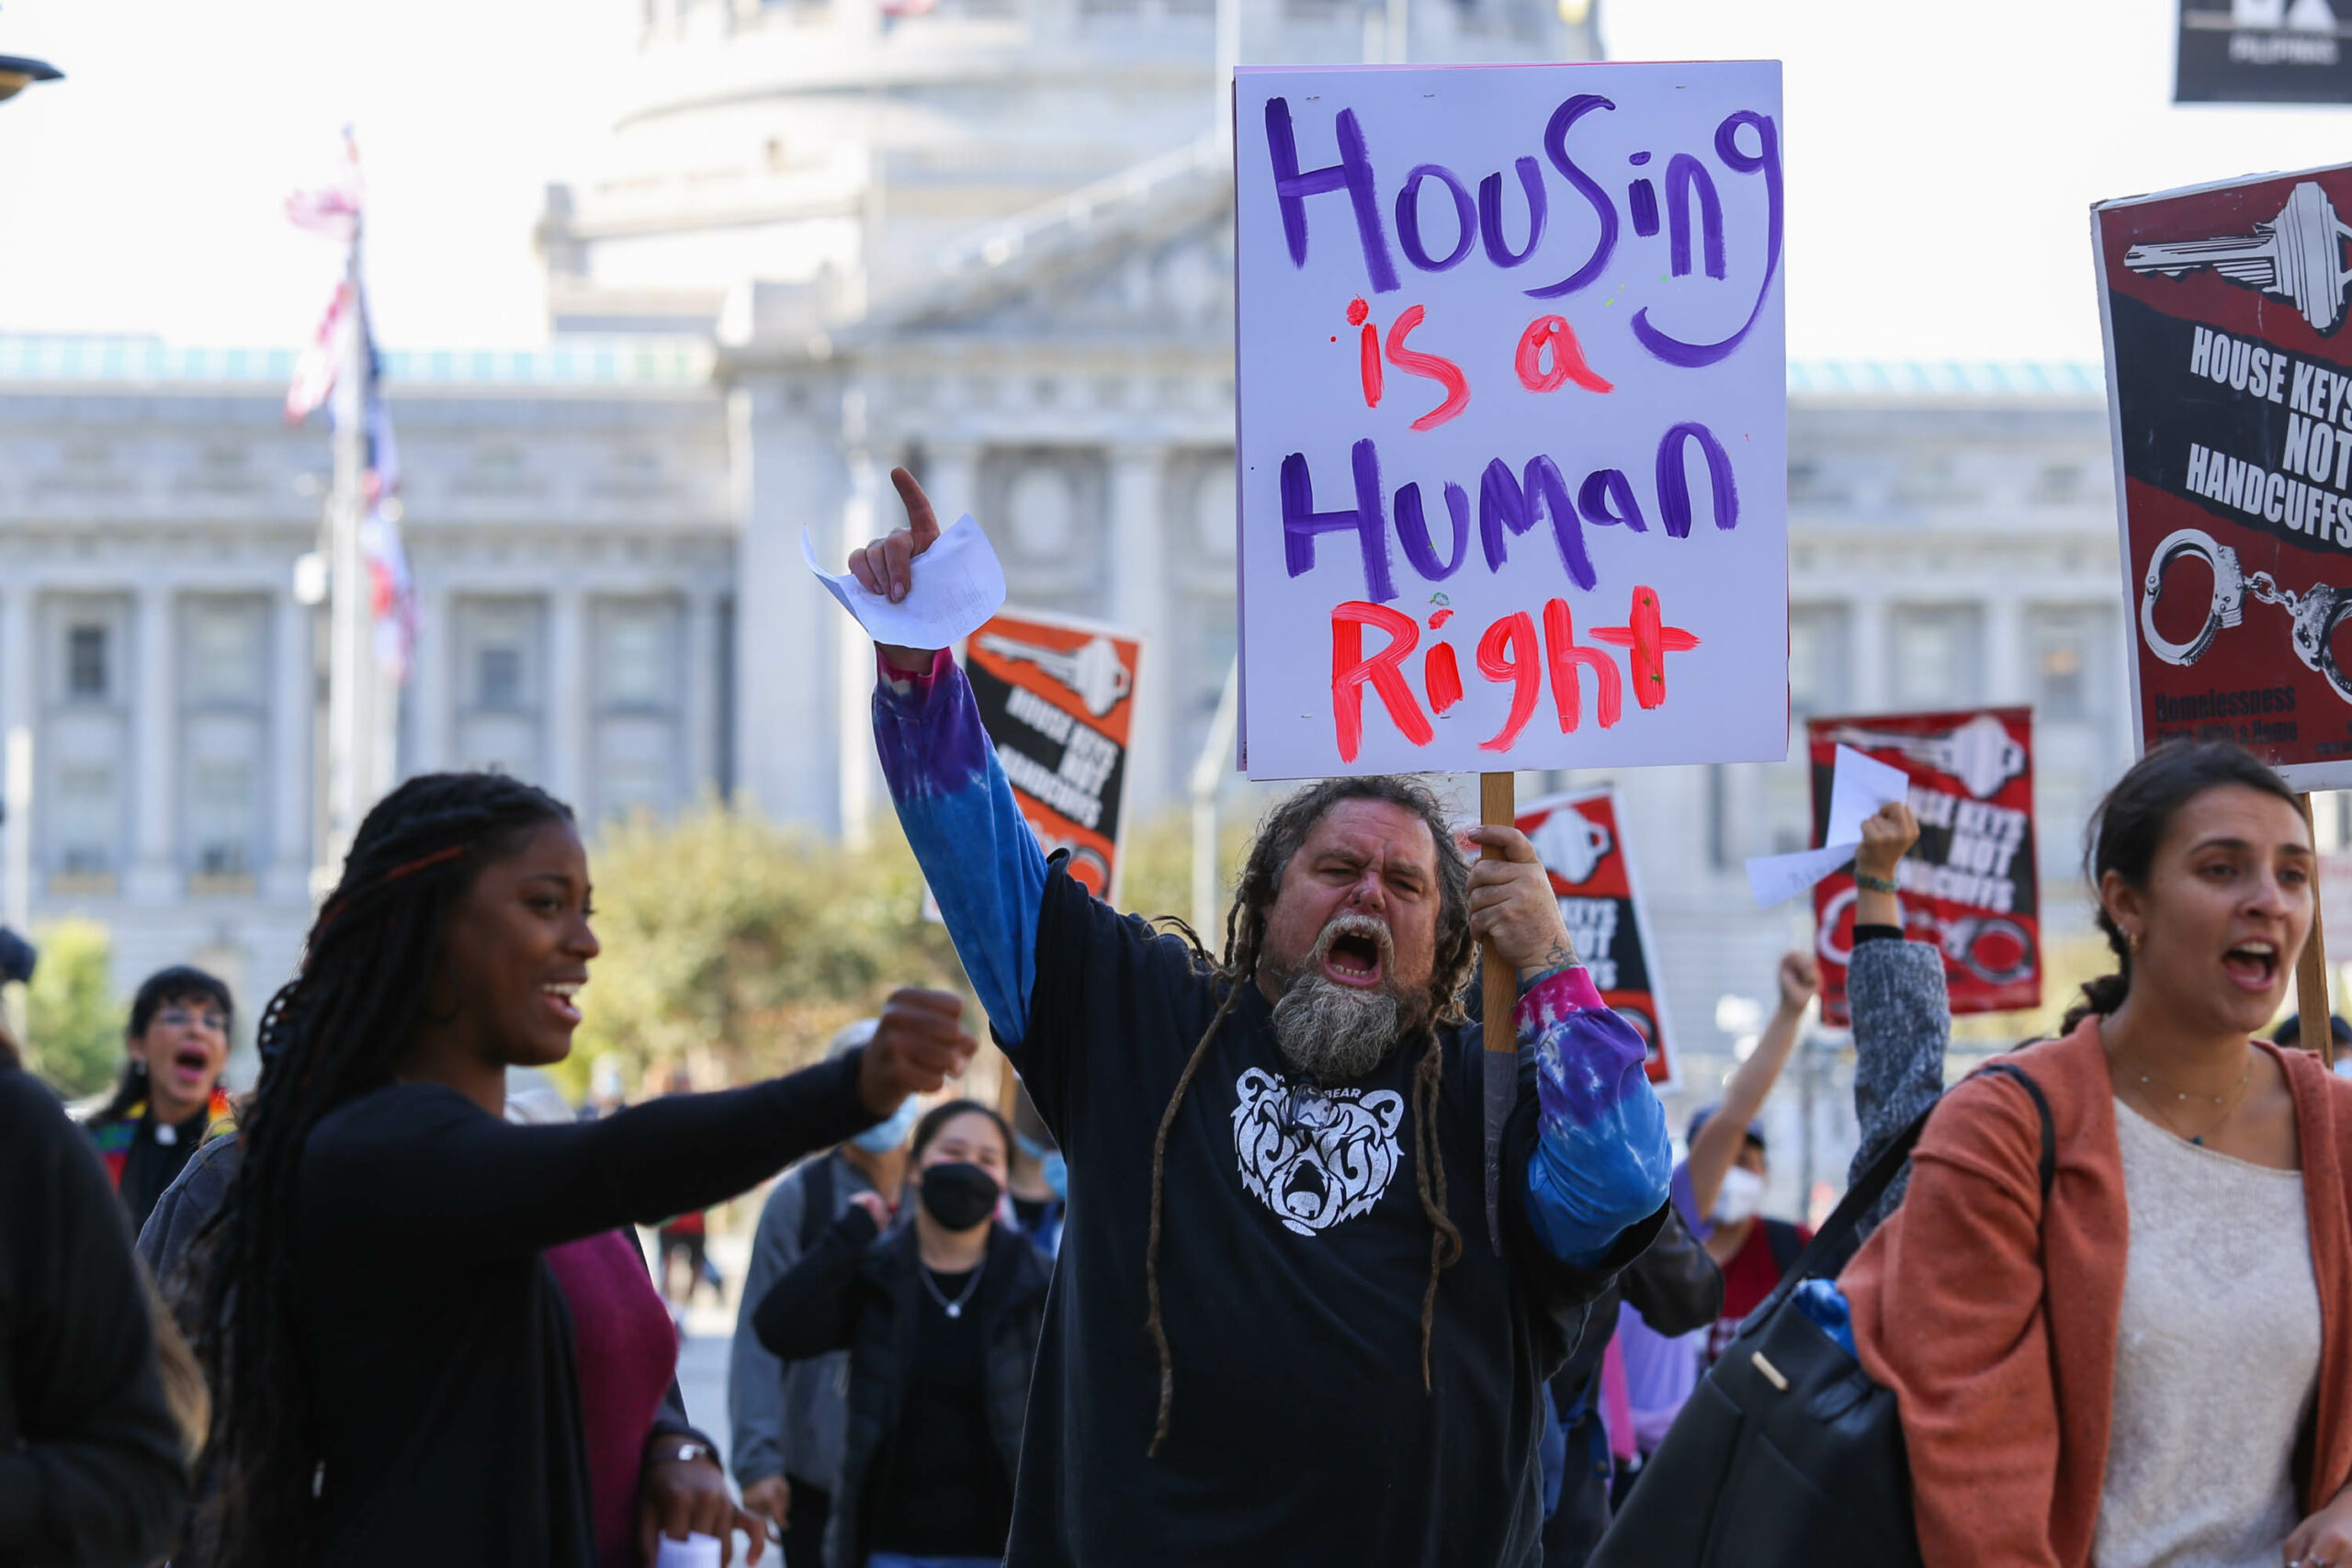 Wanting More From Tax Dollars, Voters Poised to Add Oversight to Homelessness Department